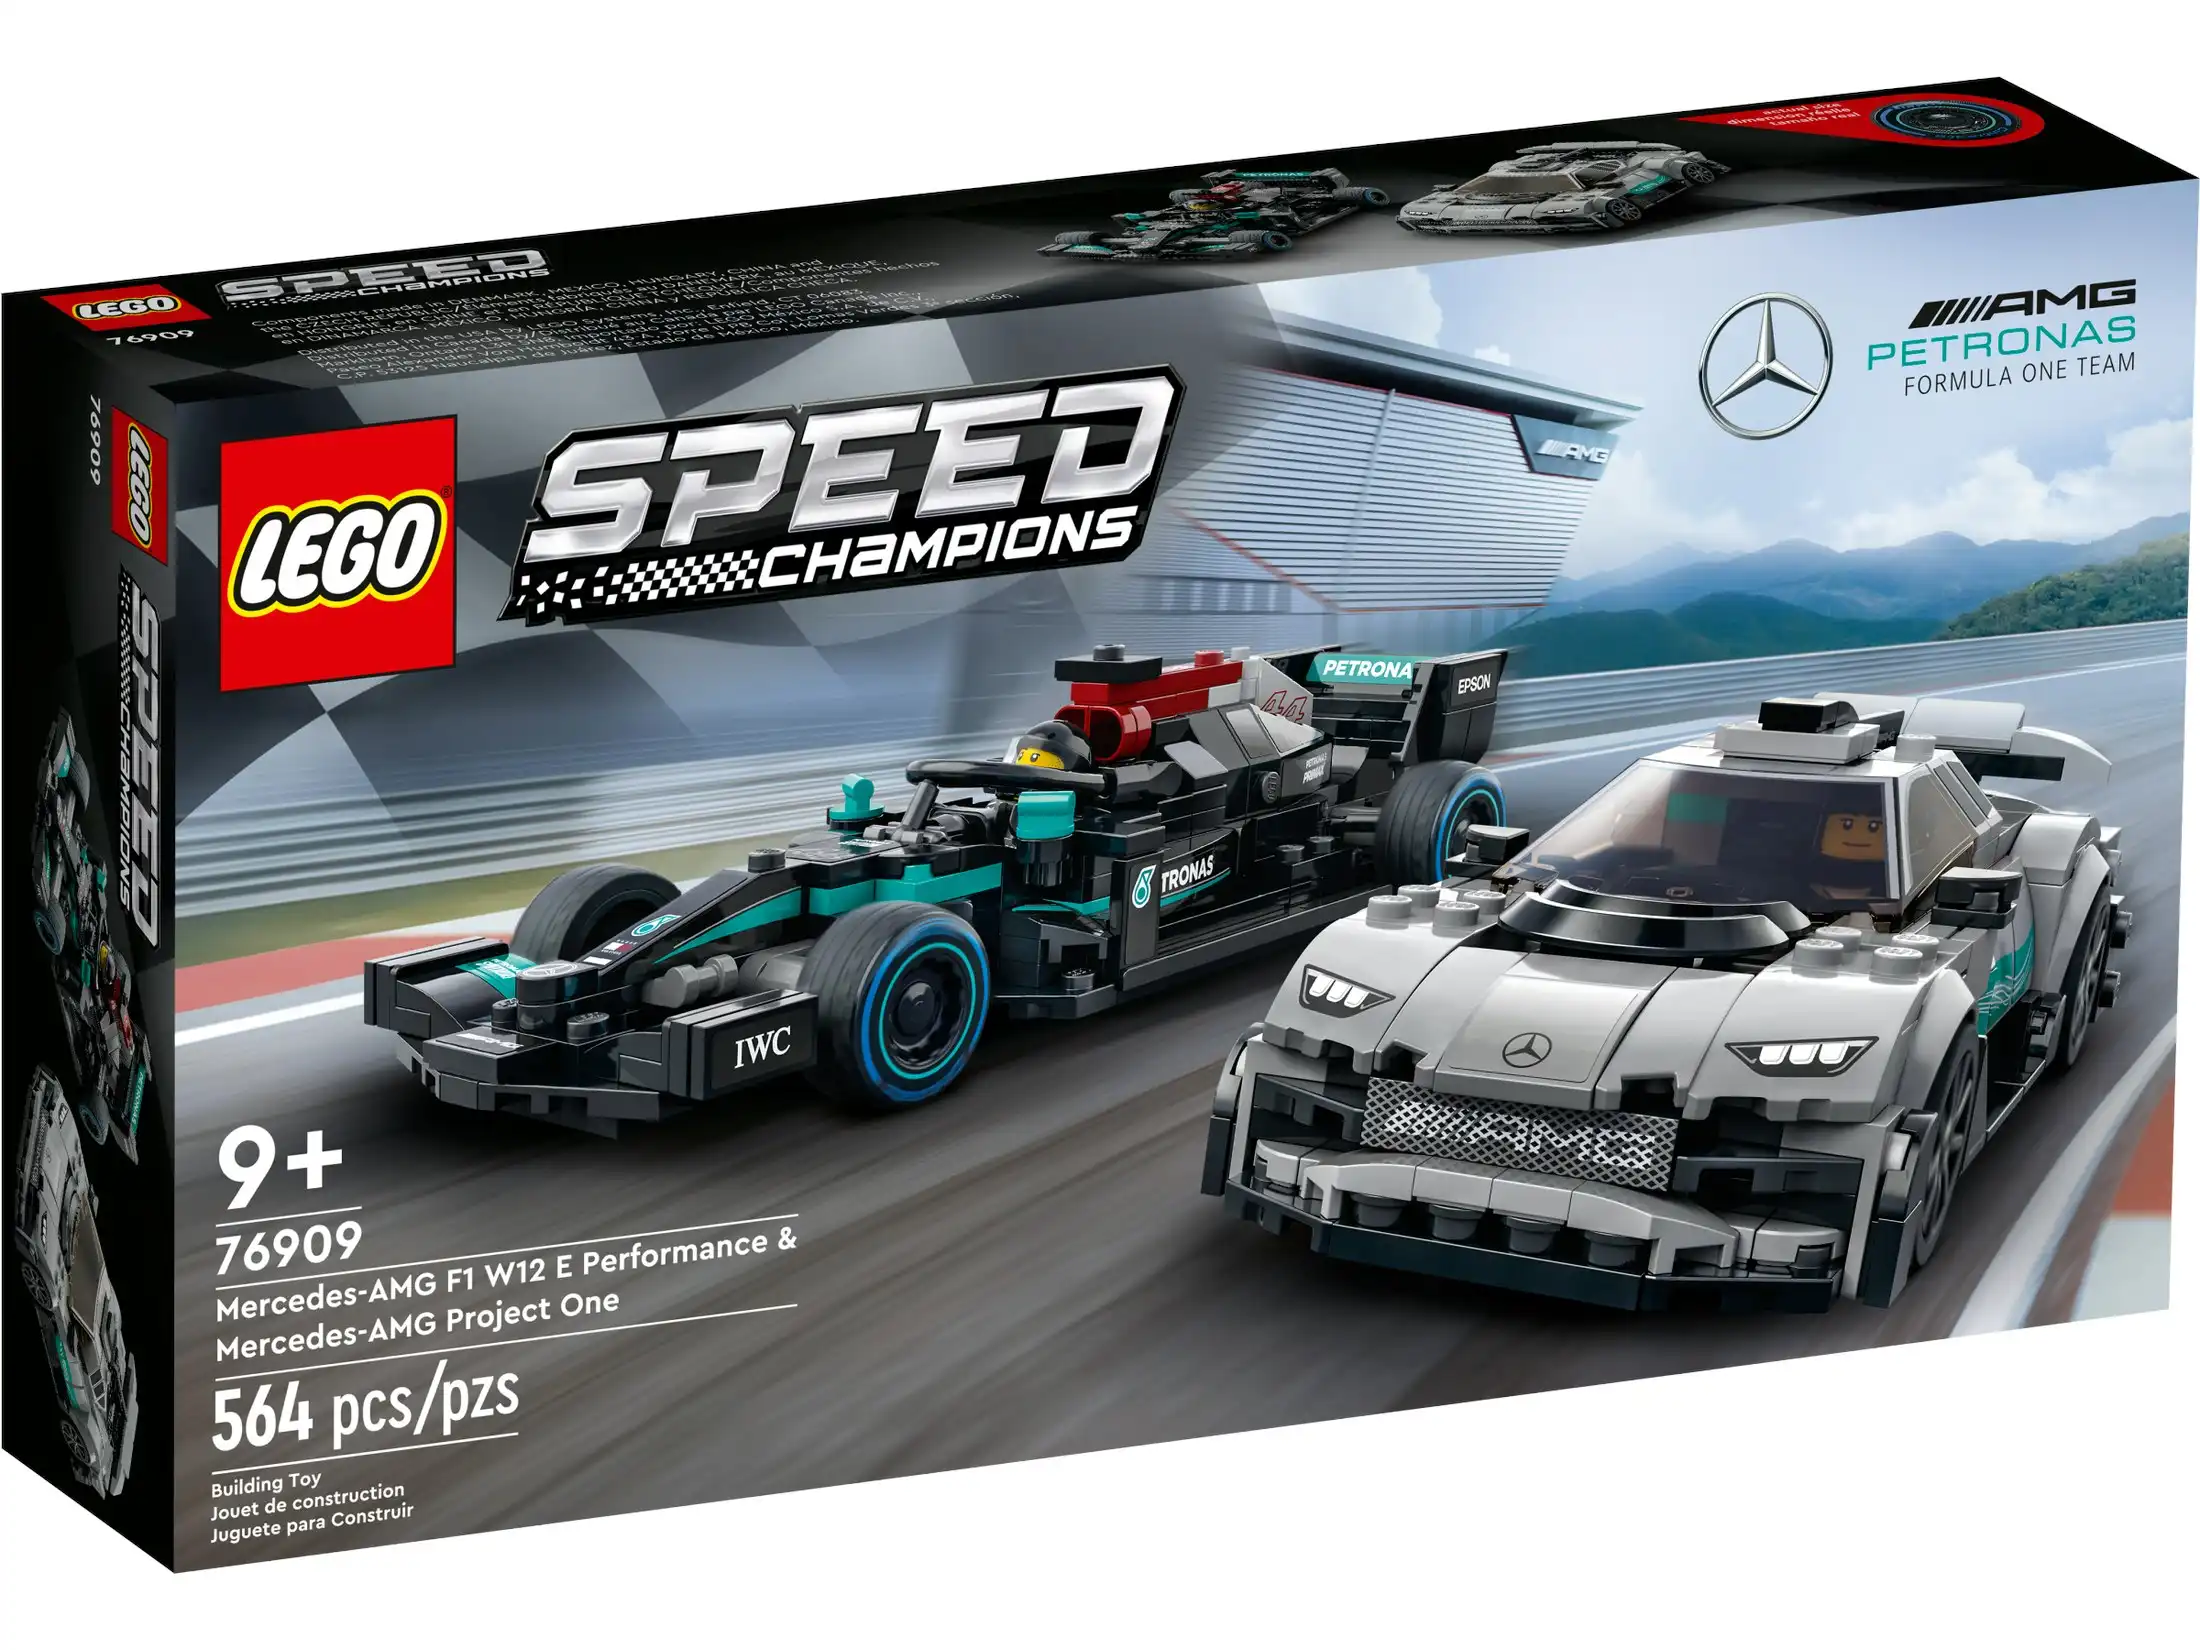 LEGO 76909 Mercedes-AMG F1 W12 E Performance & Mercedes-AMG Project One - Speed Champions